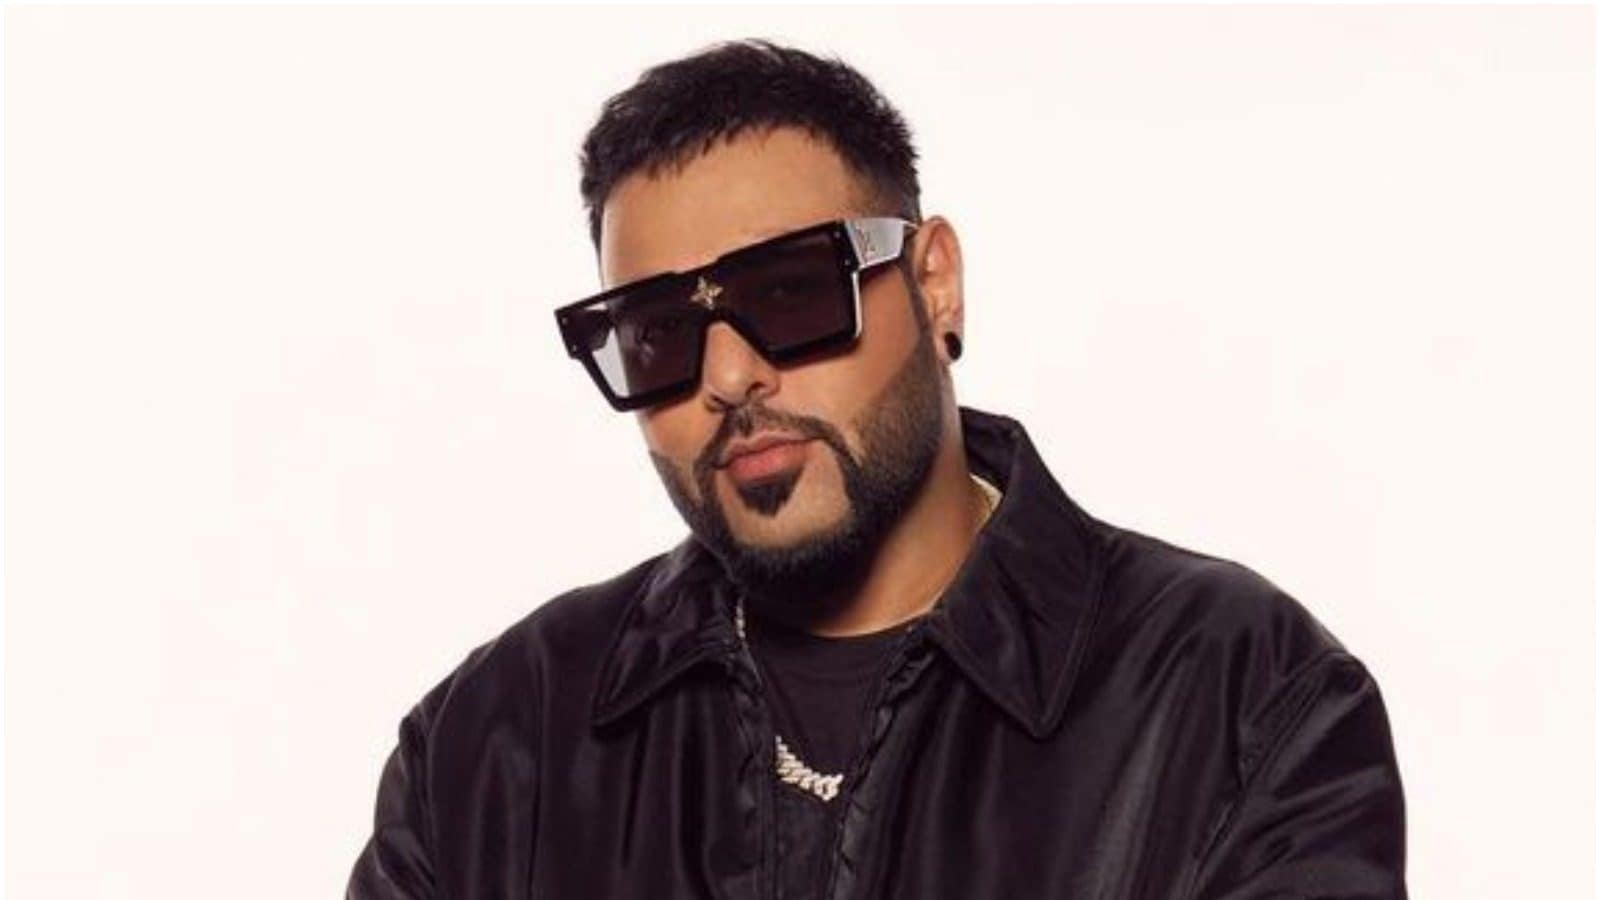 Badshah: I don't approve of music that glorifies objectification of women |  The Business Standard